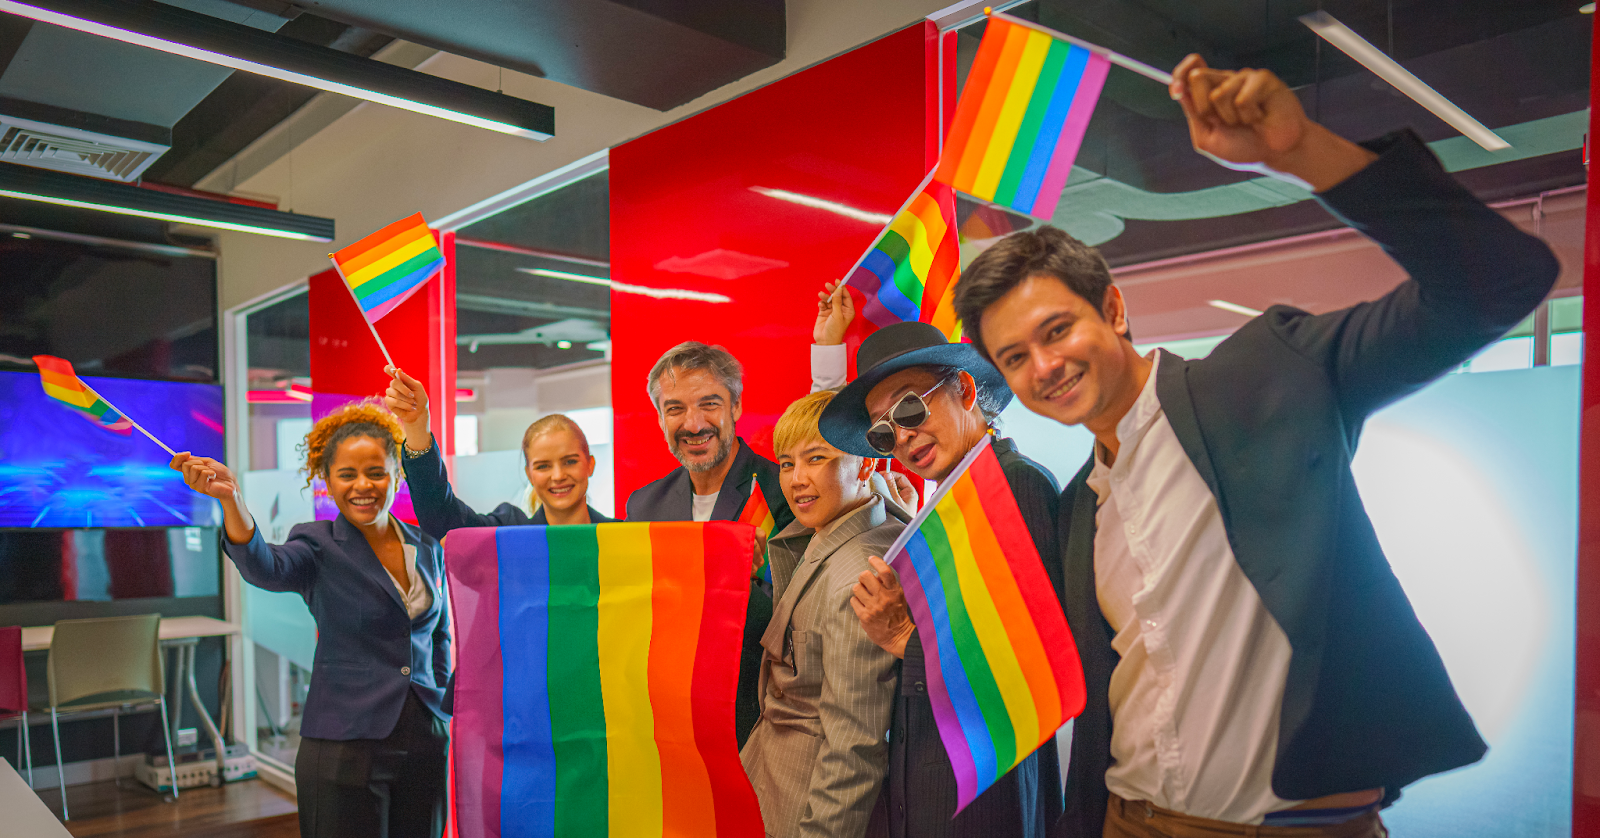 Office employees celebrating pride with flags (Credit: AdobeStock)